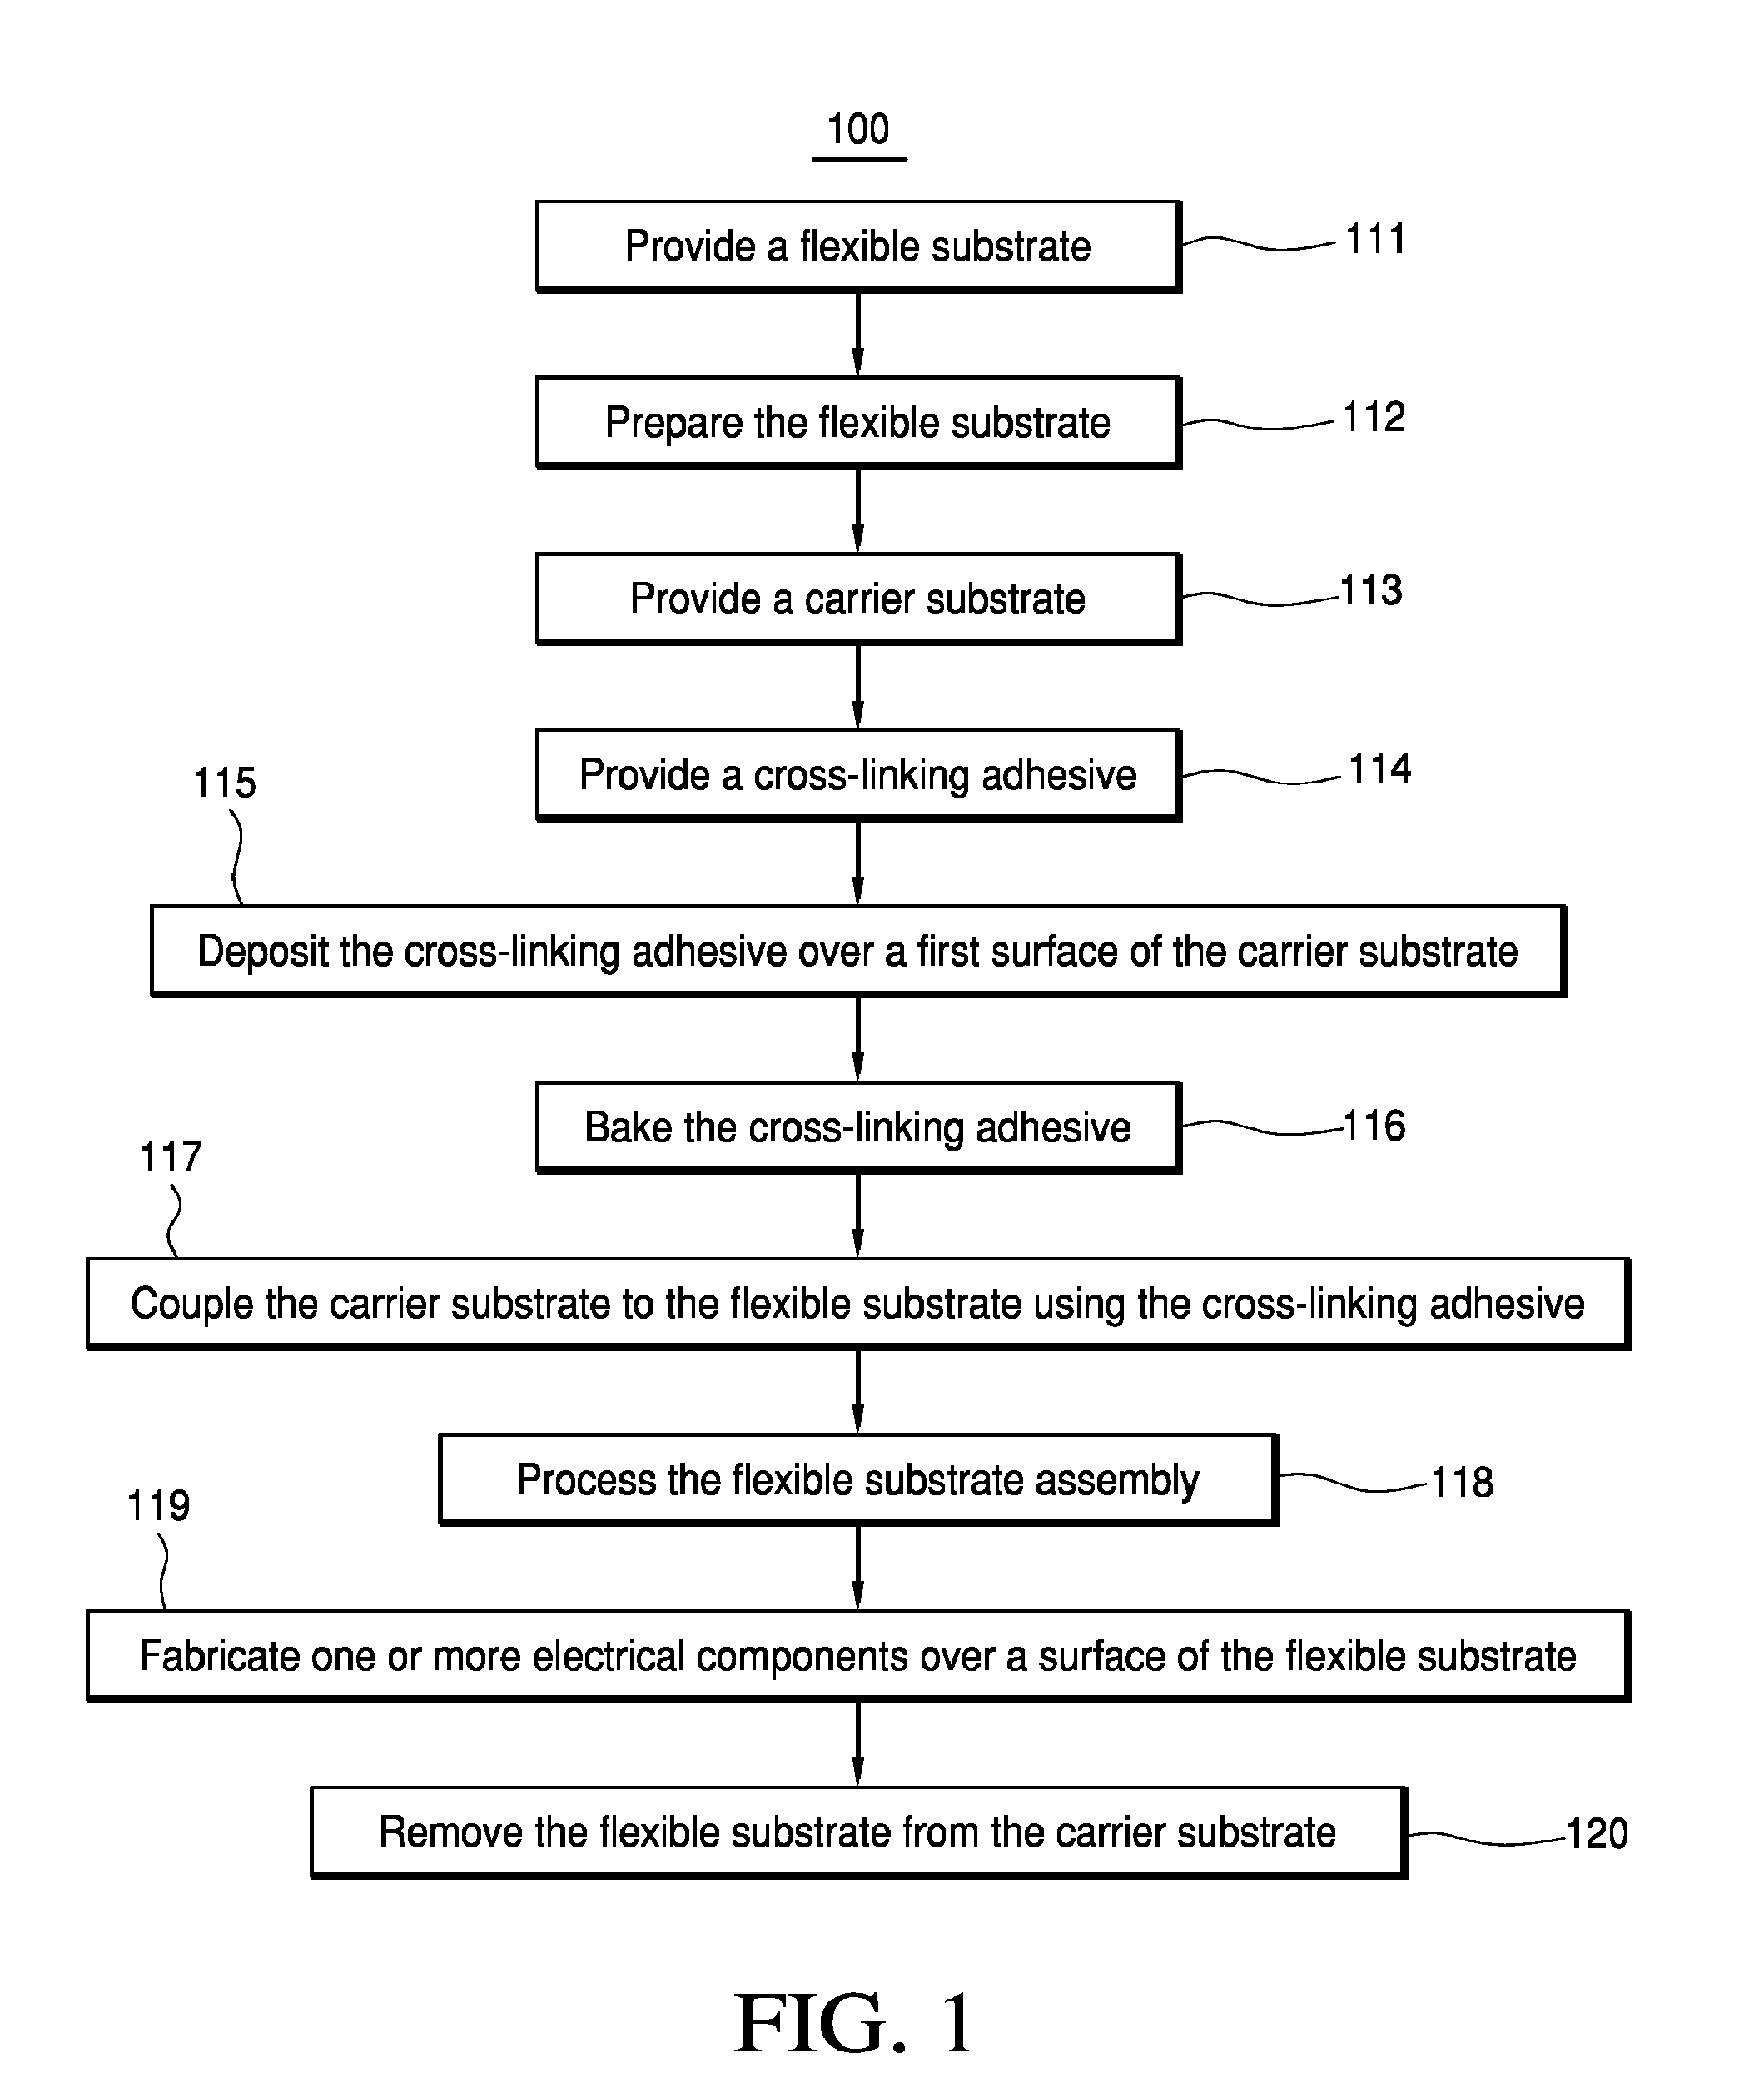 Method of preparing a flexible substrate assembly and flexible substrate assembly therefrom